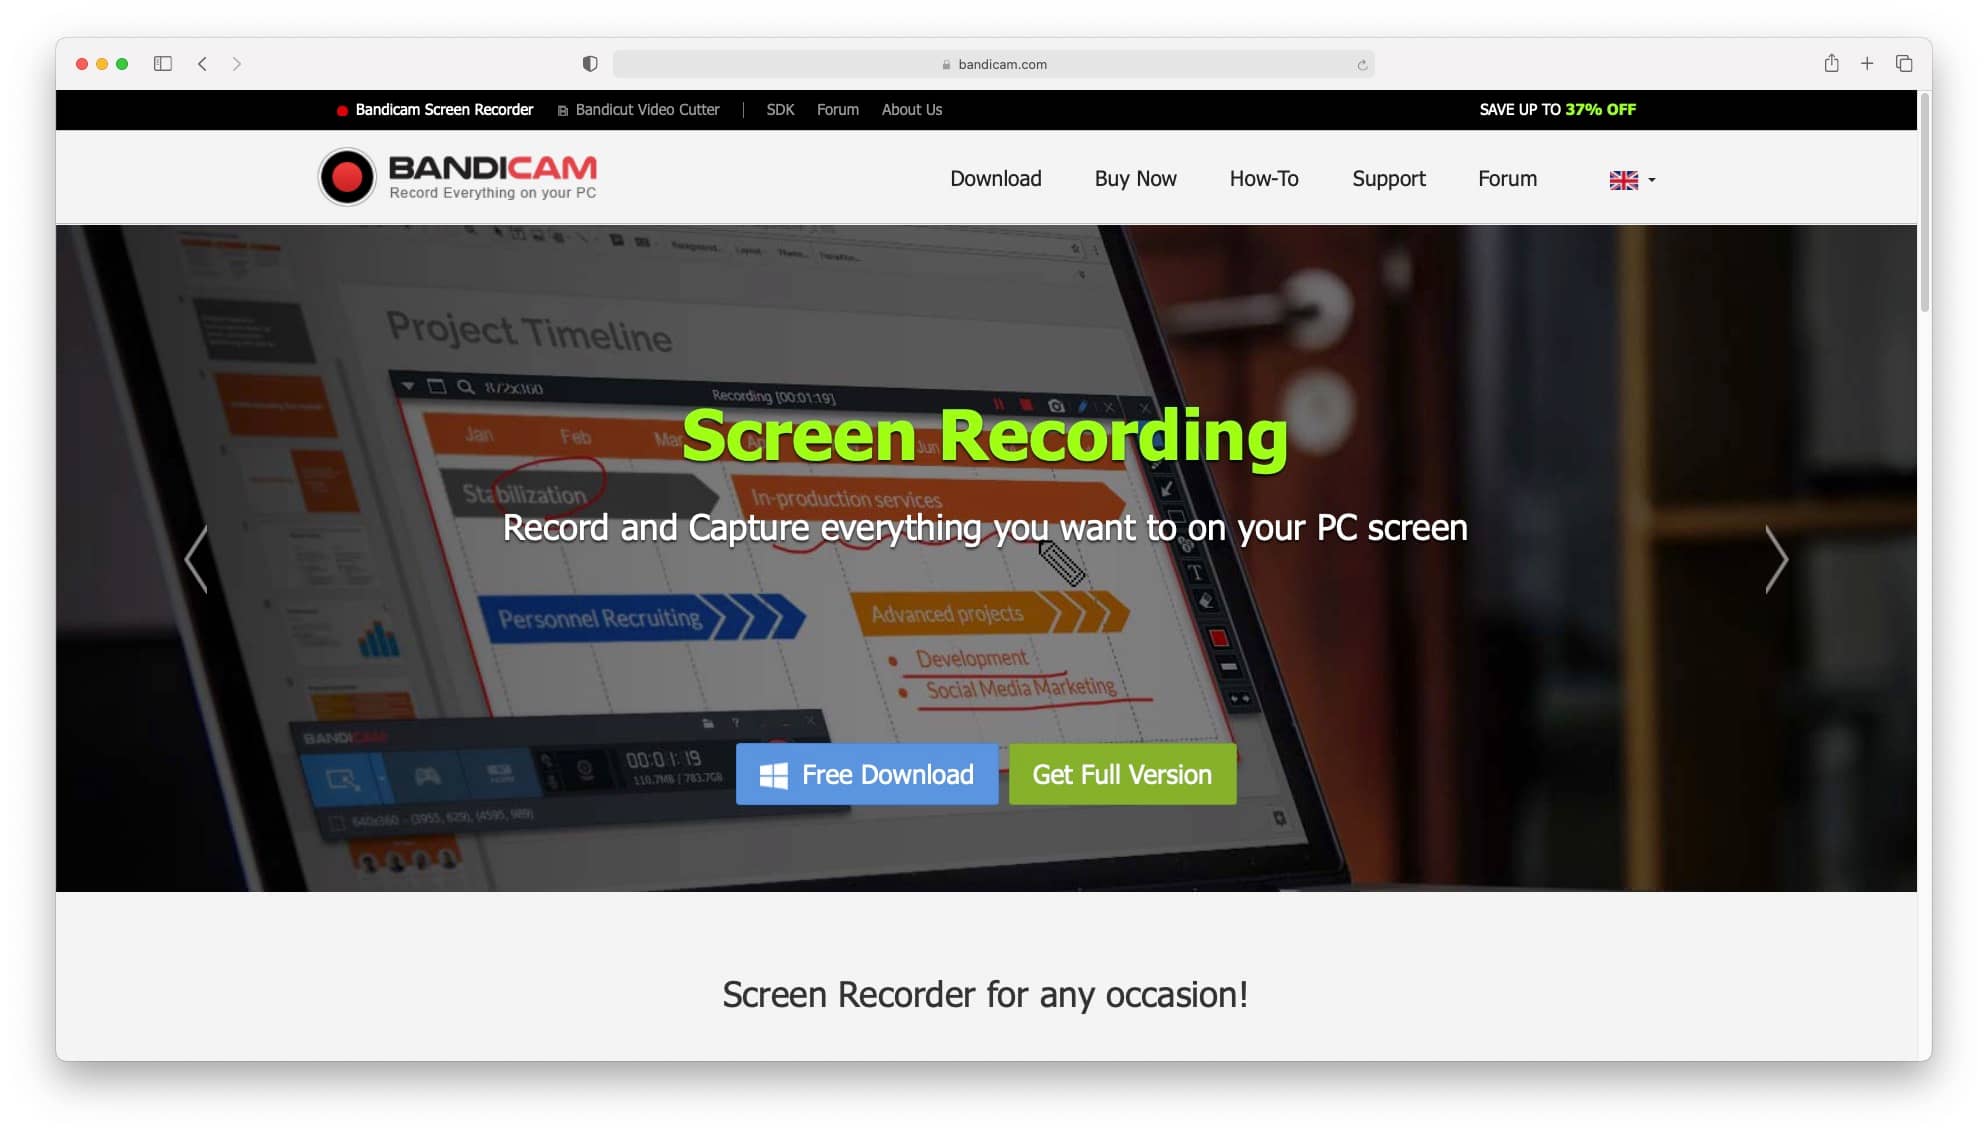 Bandicam - one of the best screen recording software